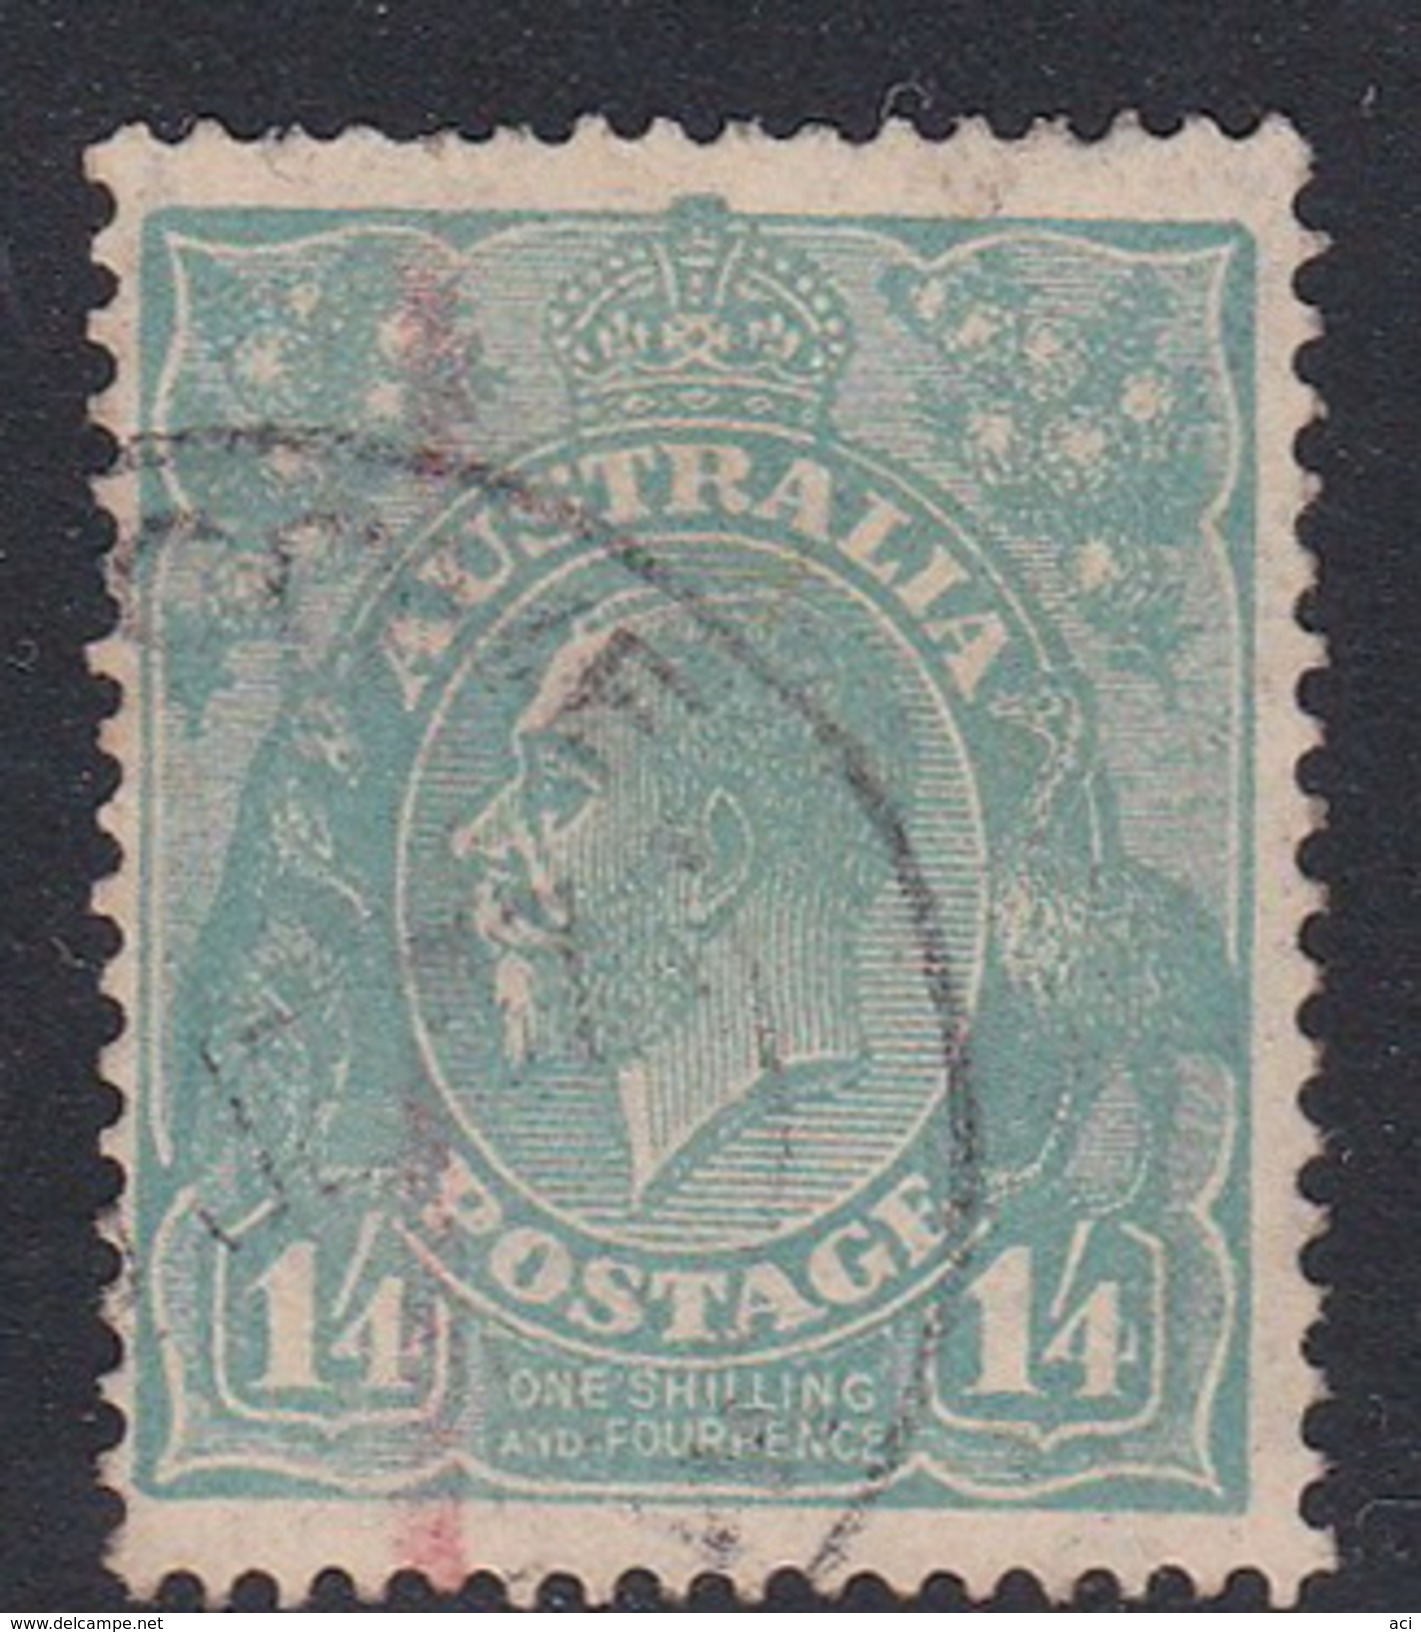 Australia SG 131 1931-36 C Of A Watermark King George V, S One Shilling And Four Pence Used - Used Stamps